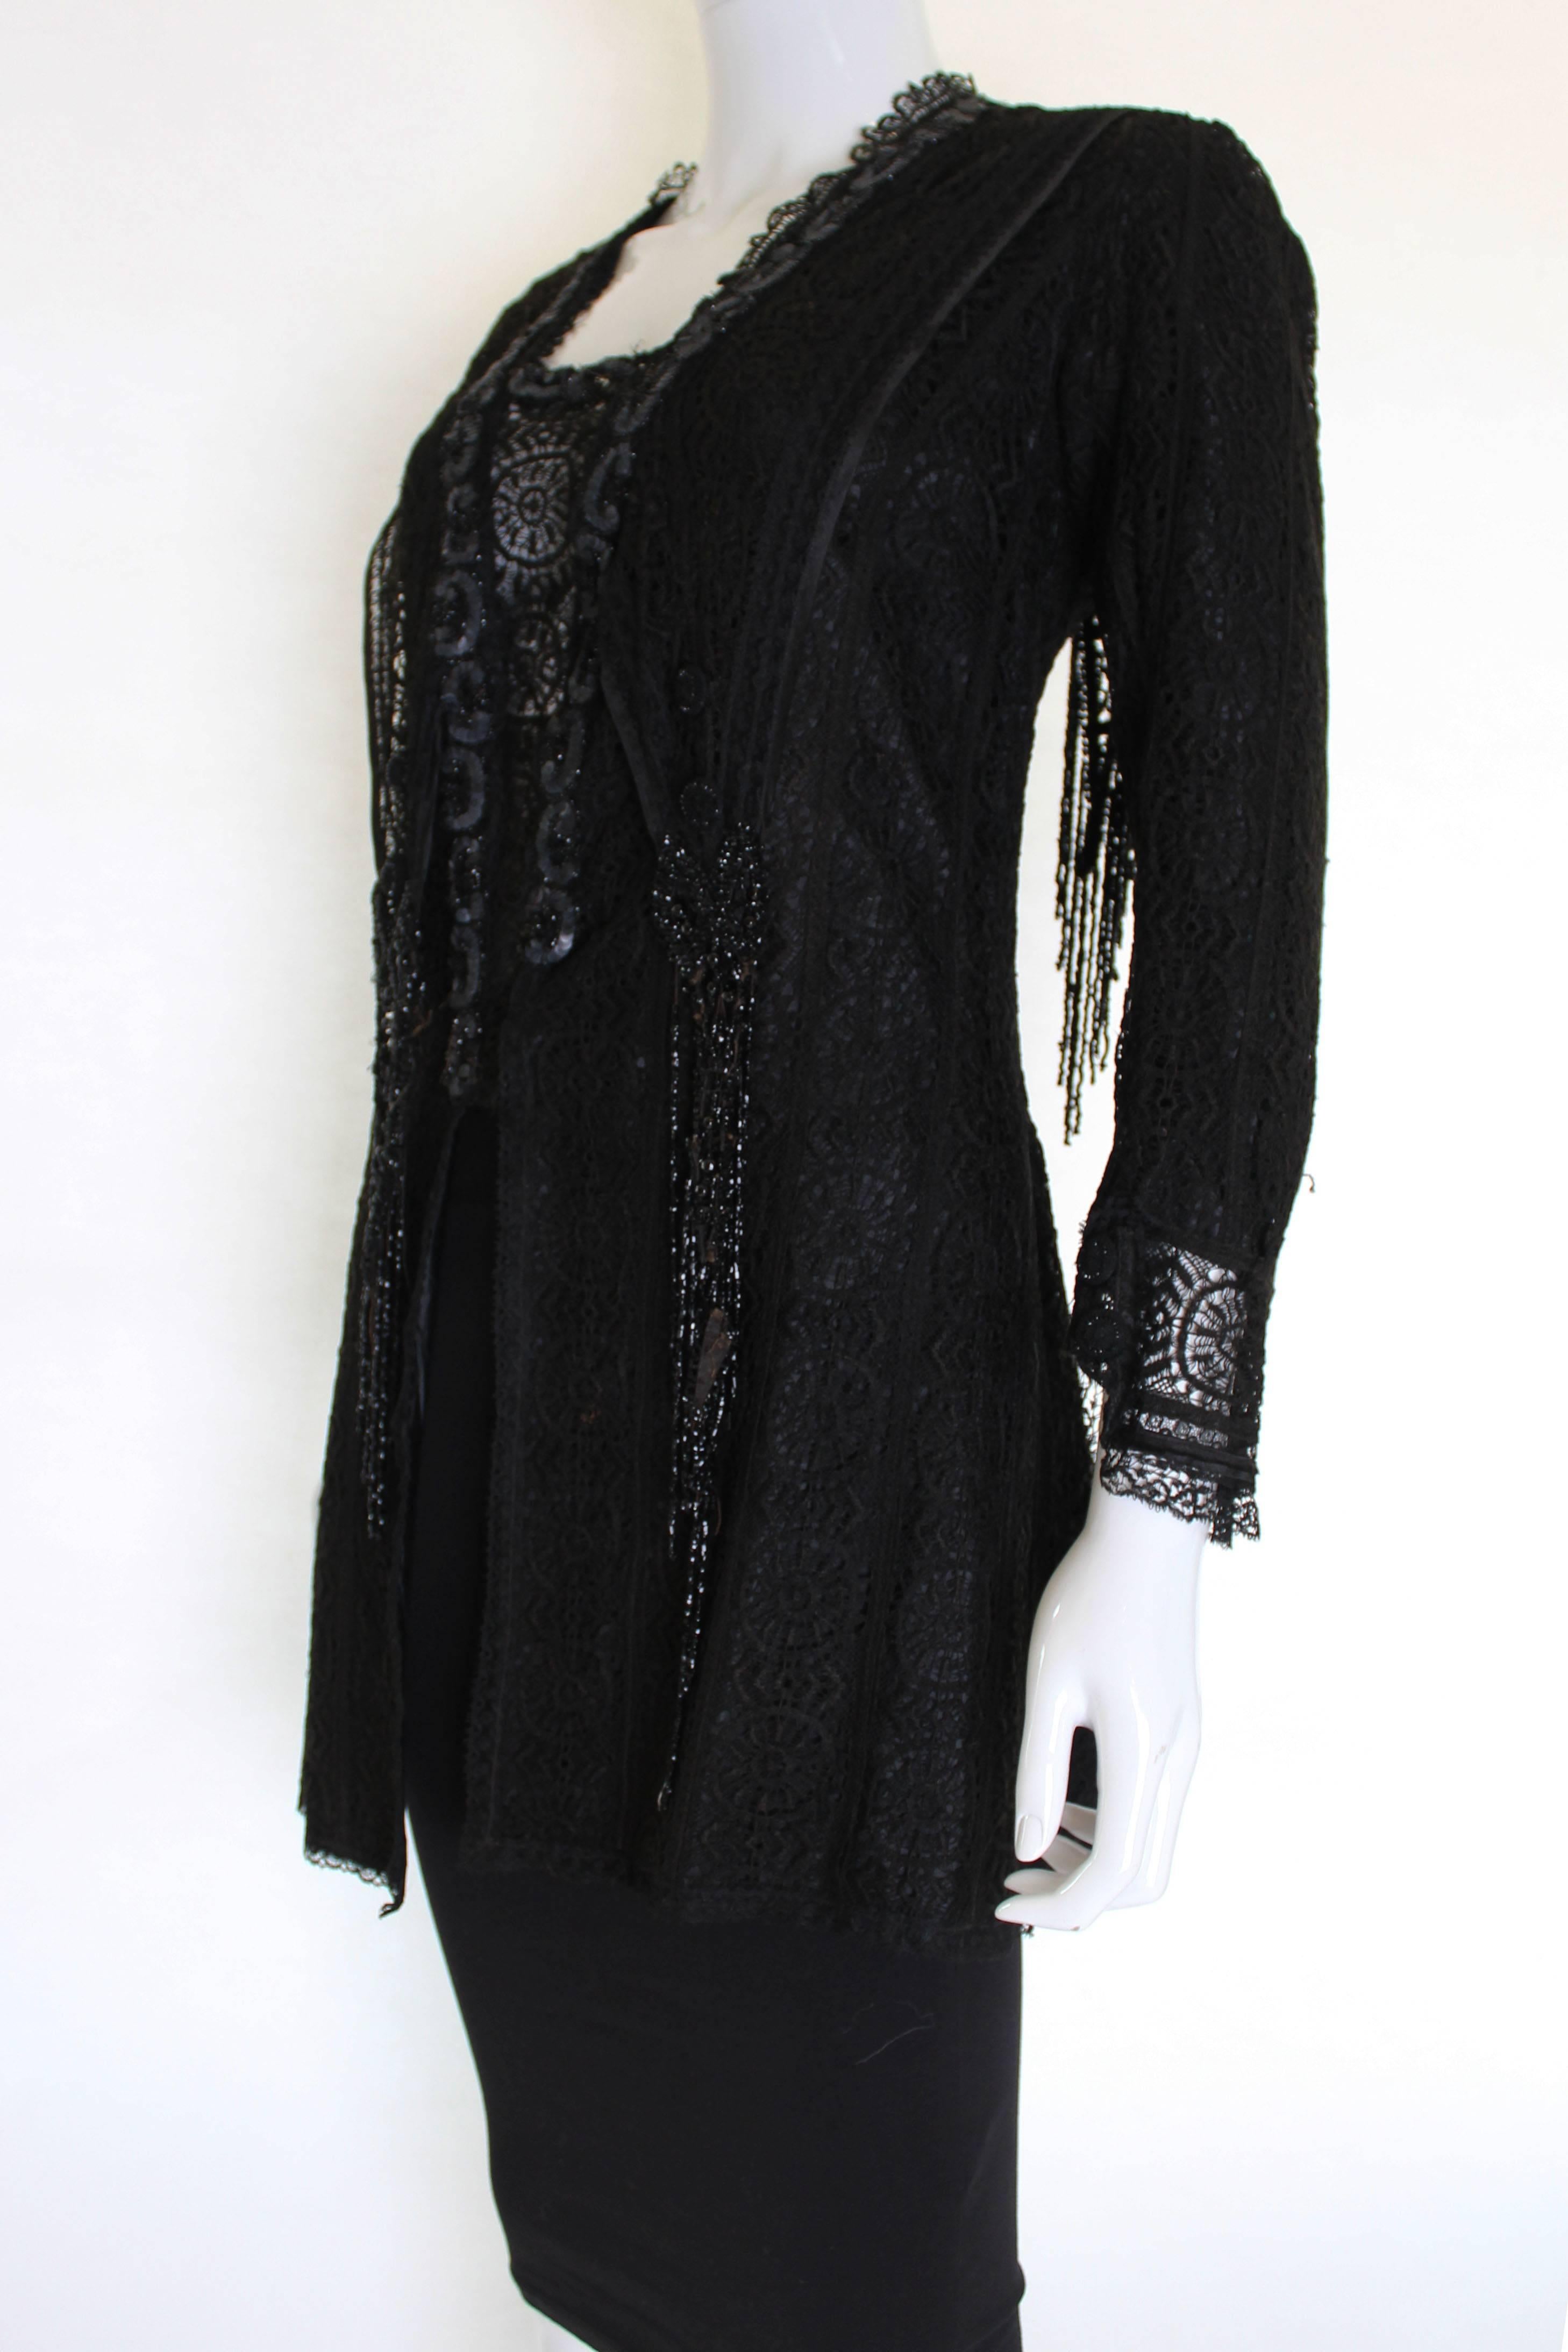 This is a wonderful black lace Victorian jacket still in a delicate but wearable condition. The main material is lace, and the jacket is fully lined in silk with weights in the hem to give great structure and shape to the piece. There is a sailor